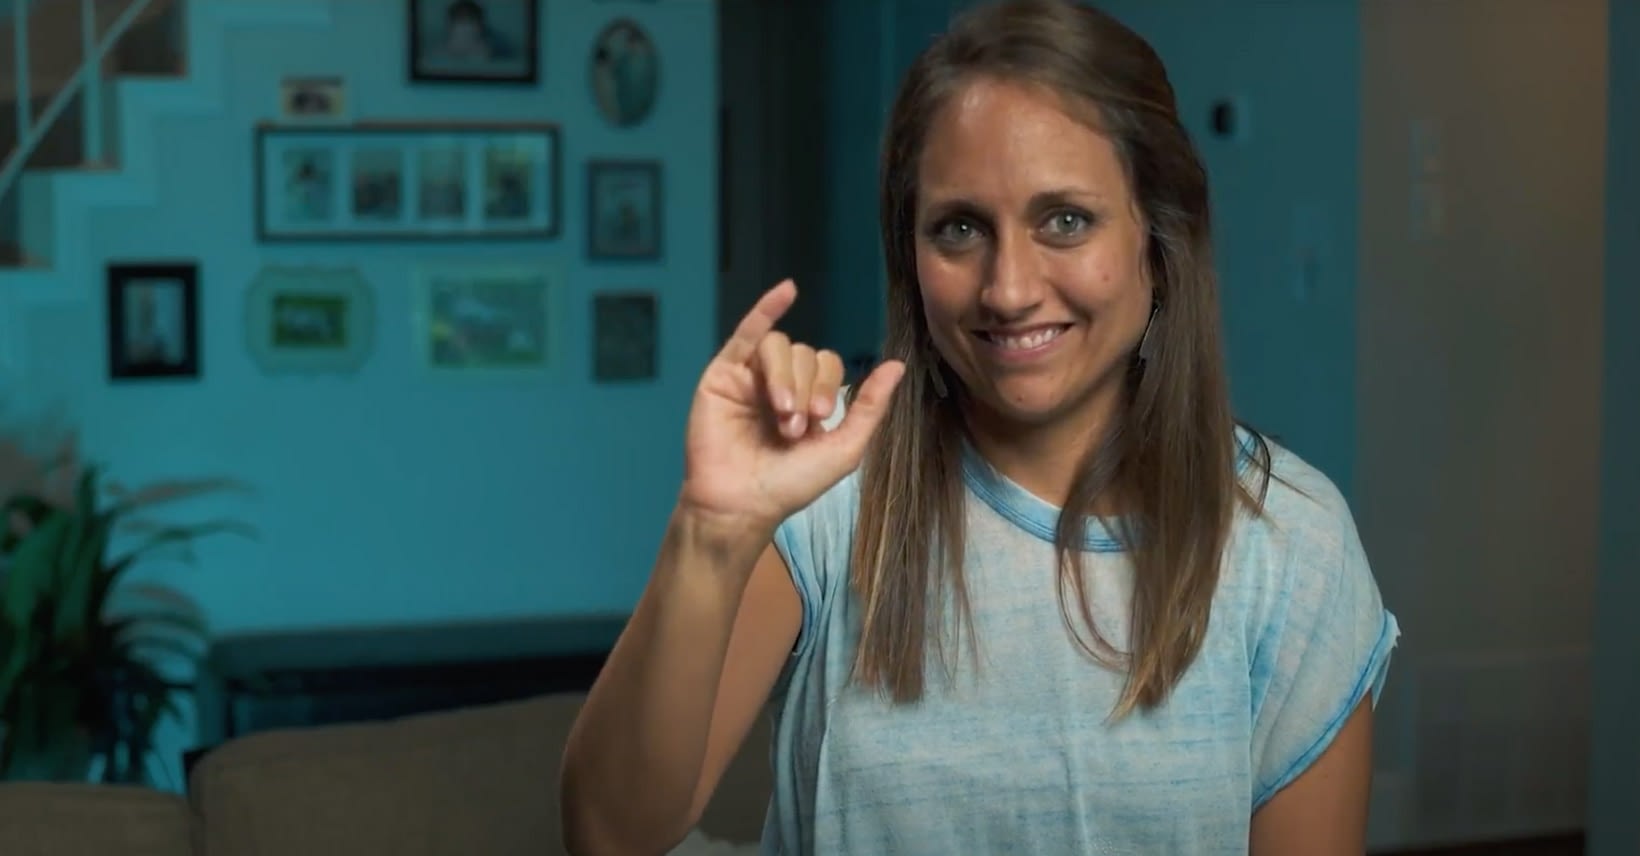 Gaby Duke shares why ASL is a powerful way to communicate with other people and with God.